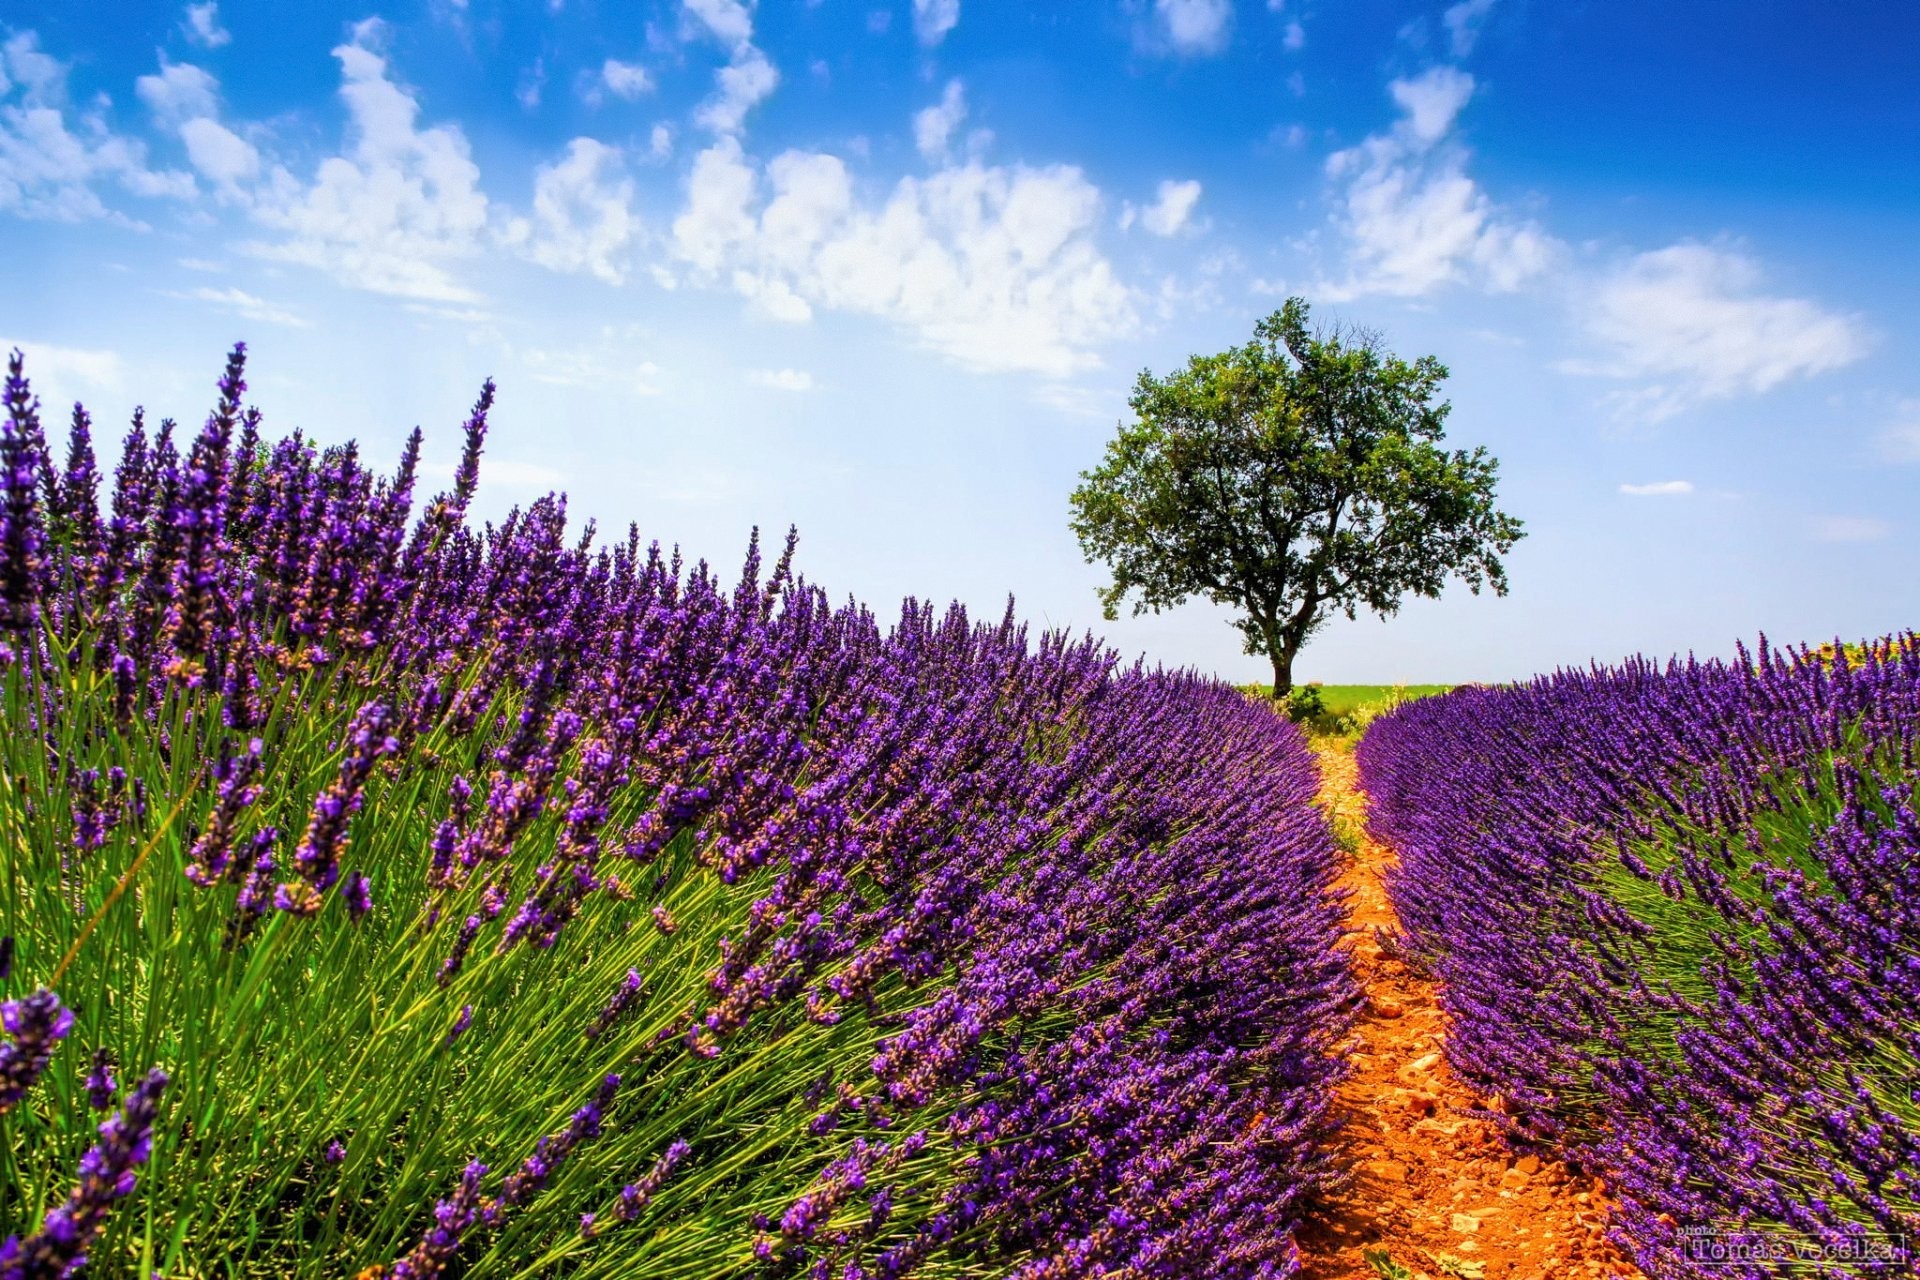 1920x1280 france provence summer july the field lavender flower tree sky clouds